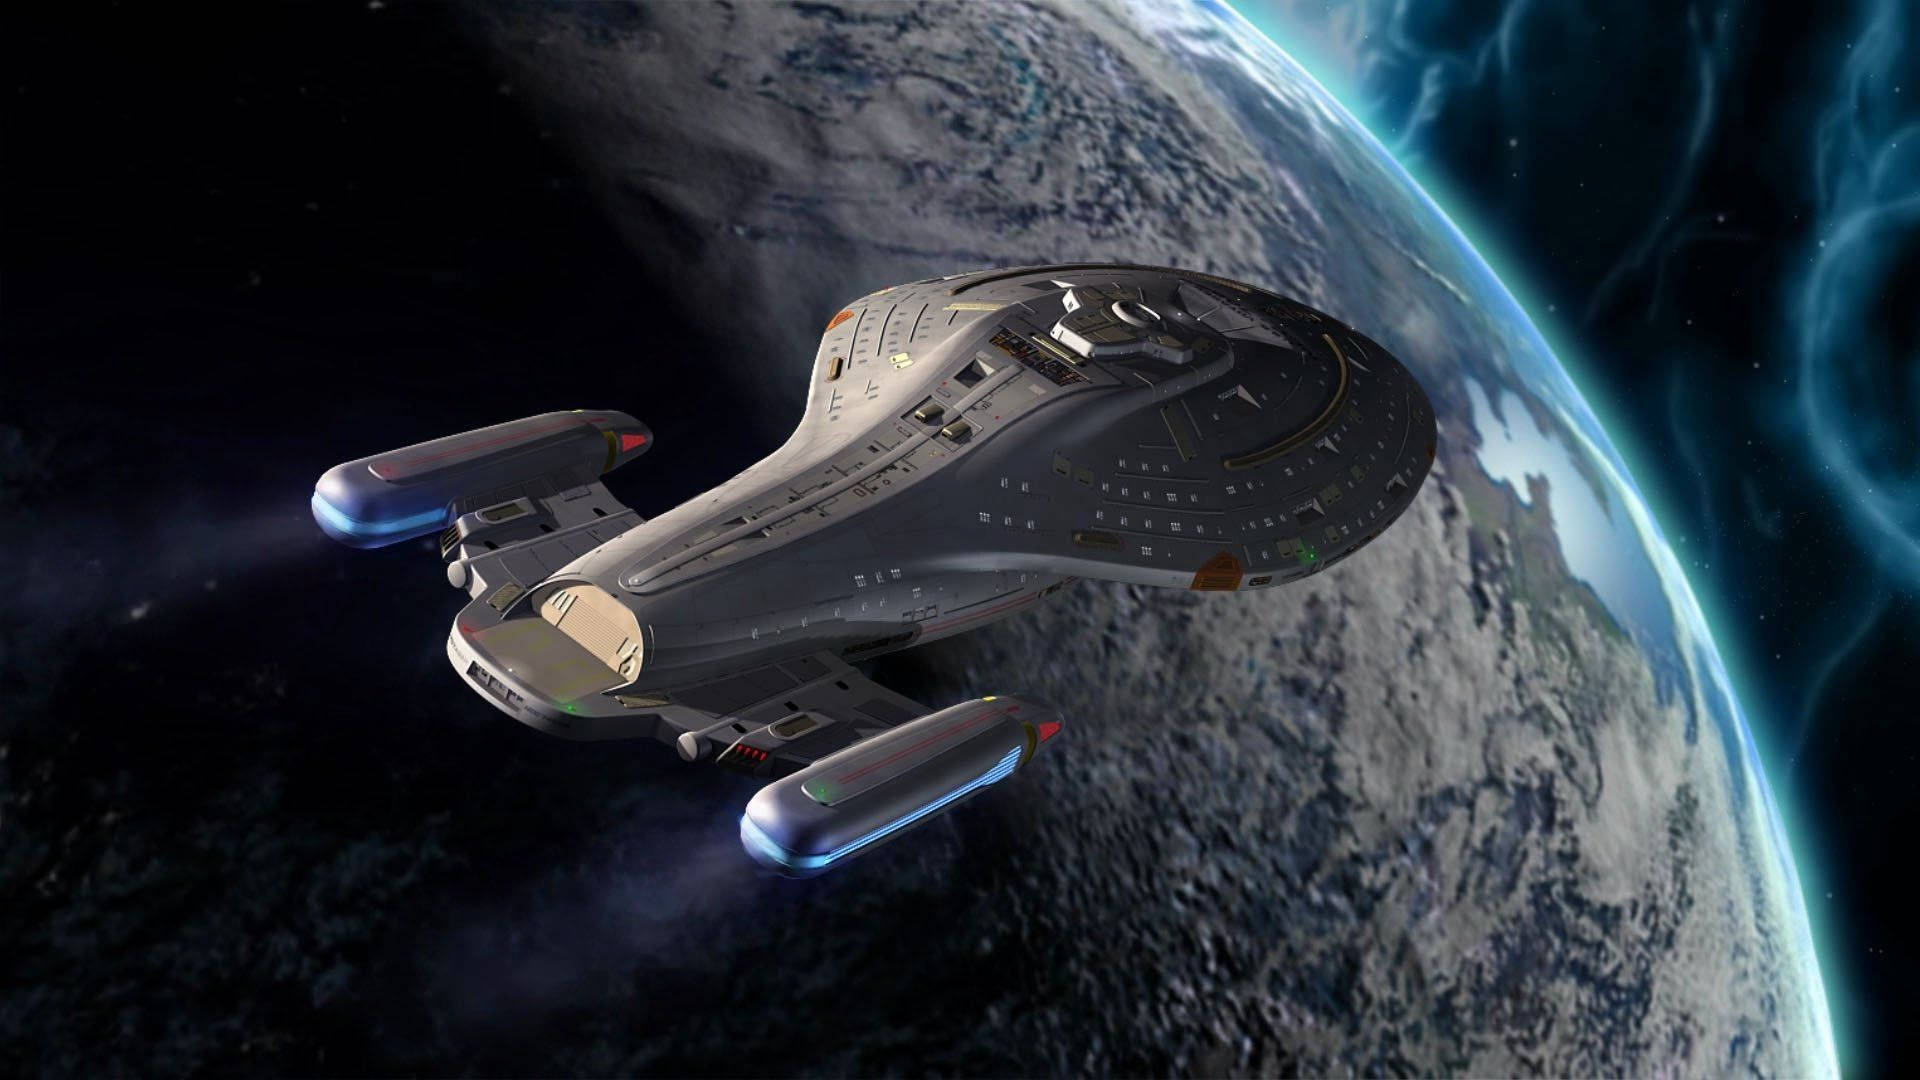 A view of the USS Voyager, bravely traveling where no one has gone before. Wallpaper